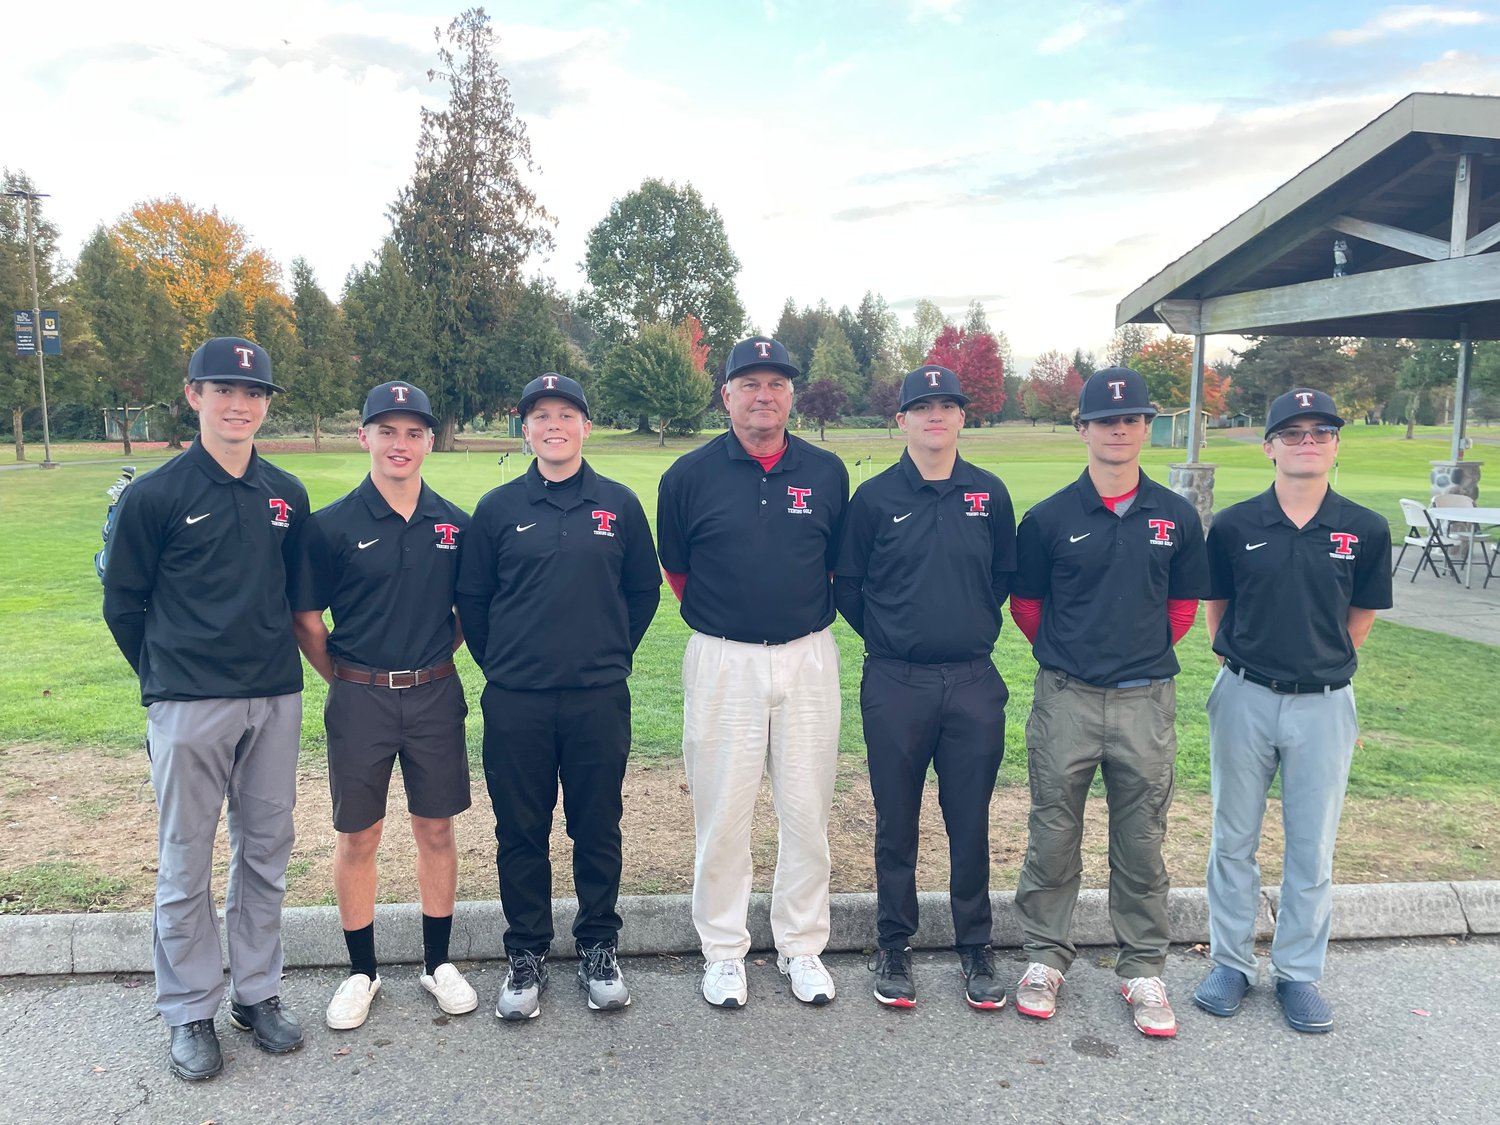 The Tenino boys golf team poses at Tumwater Valley Golf Course at the 1A District 4 Championships Oct. 24. From left to right are Preston Snider, Carson Hart, Jaxson Gore, coach Del Sandberg, Ethan Baxter, Easton Snider, and David Dallaire.